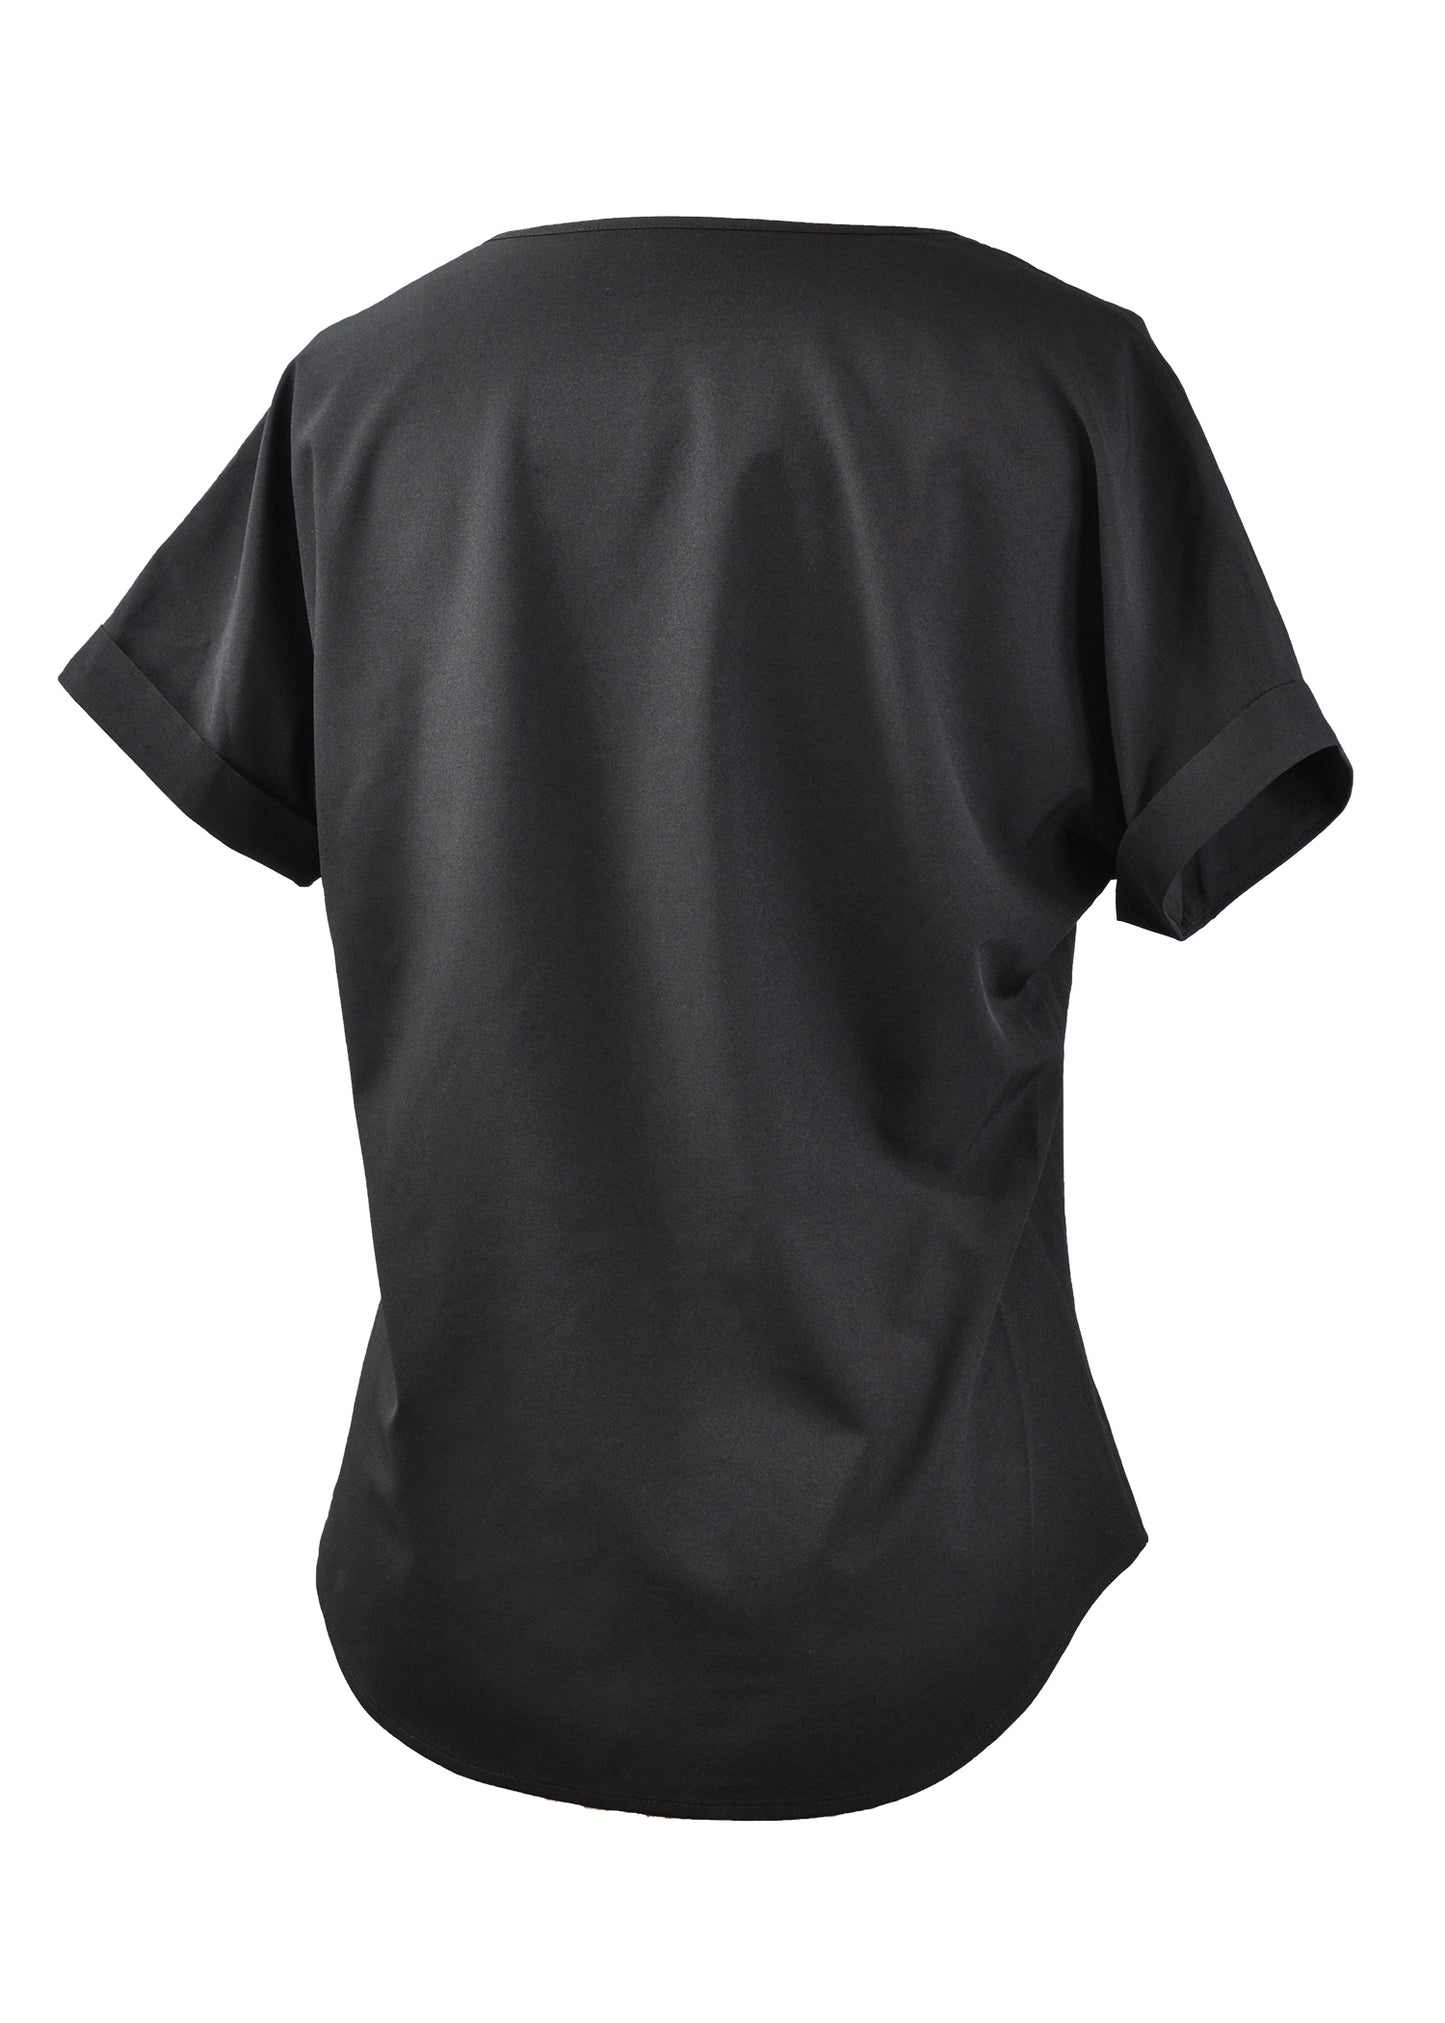 Young USA Ladies Fashion Blouse in Back View - Black